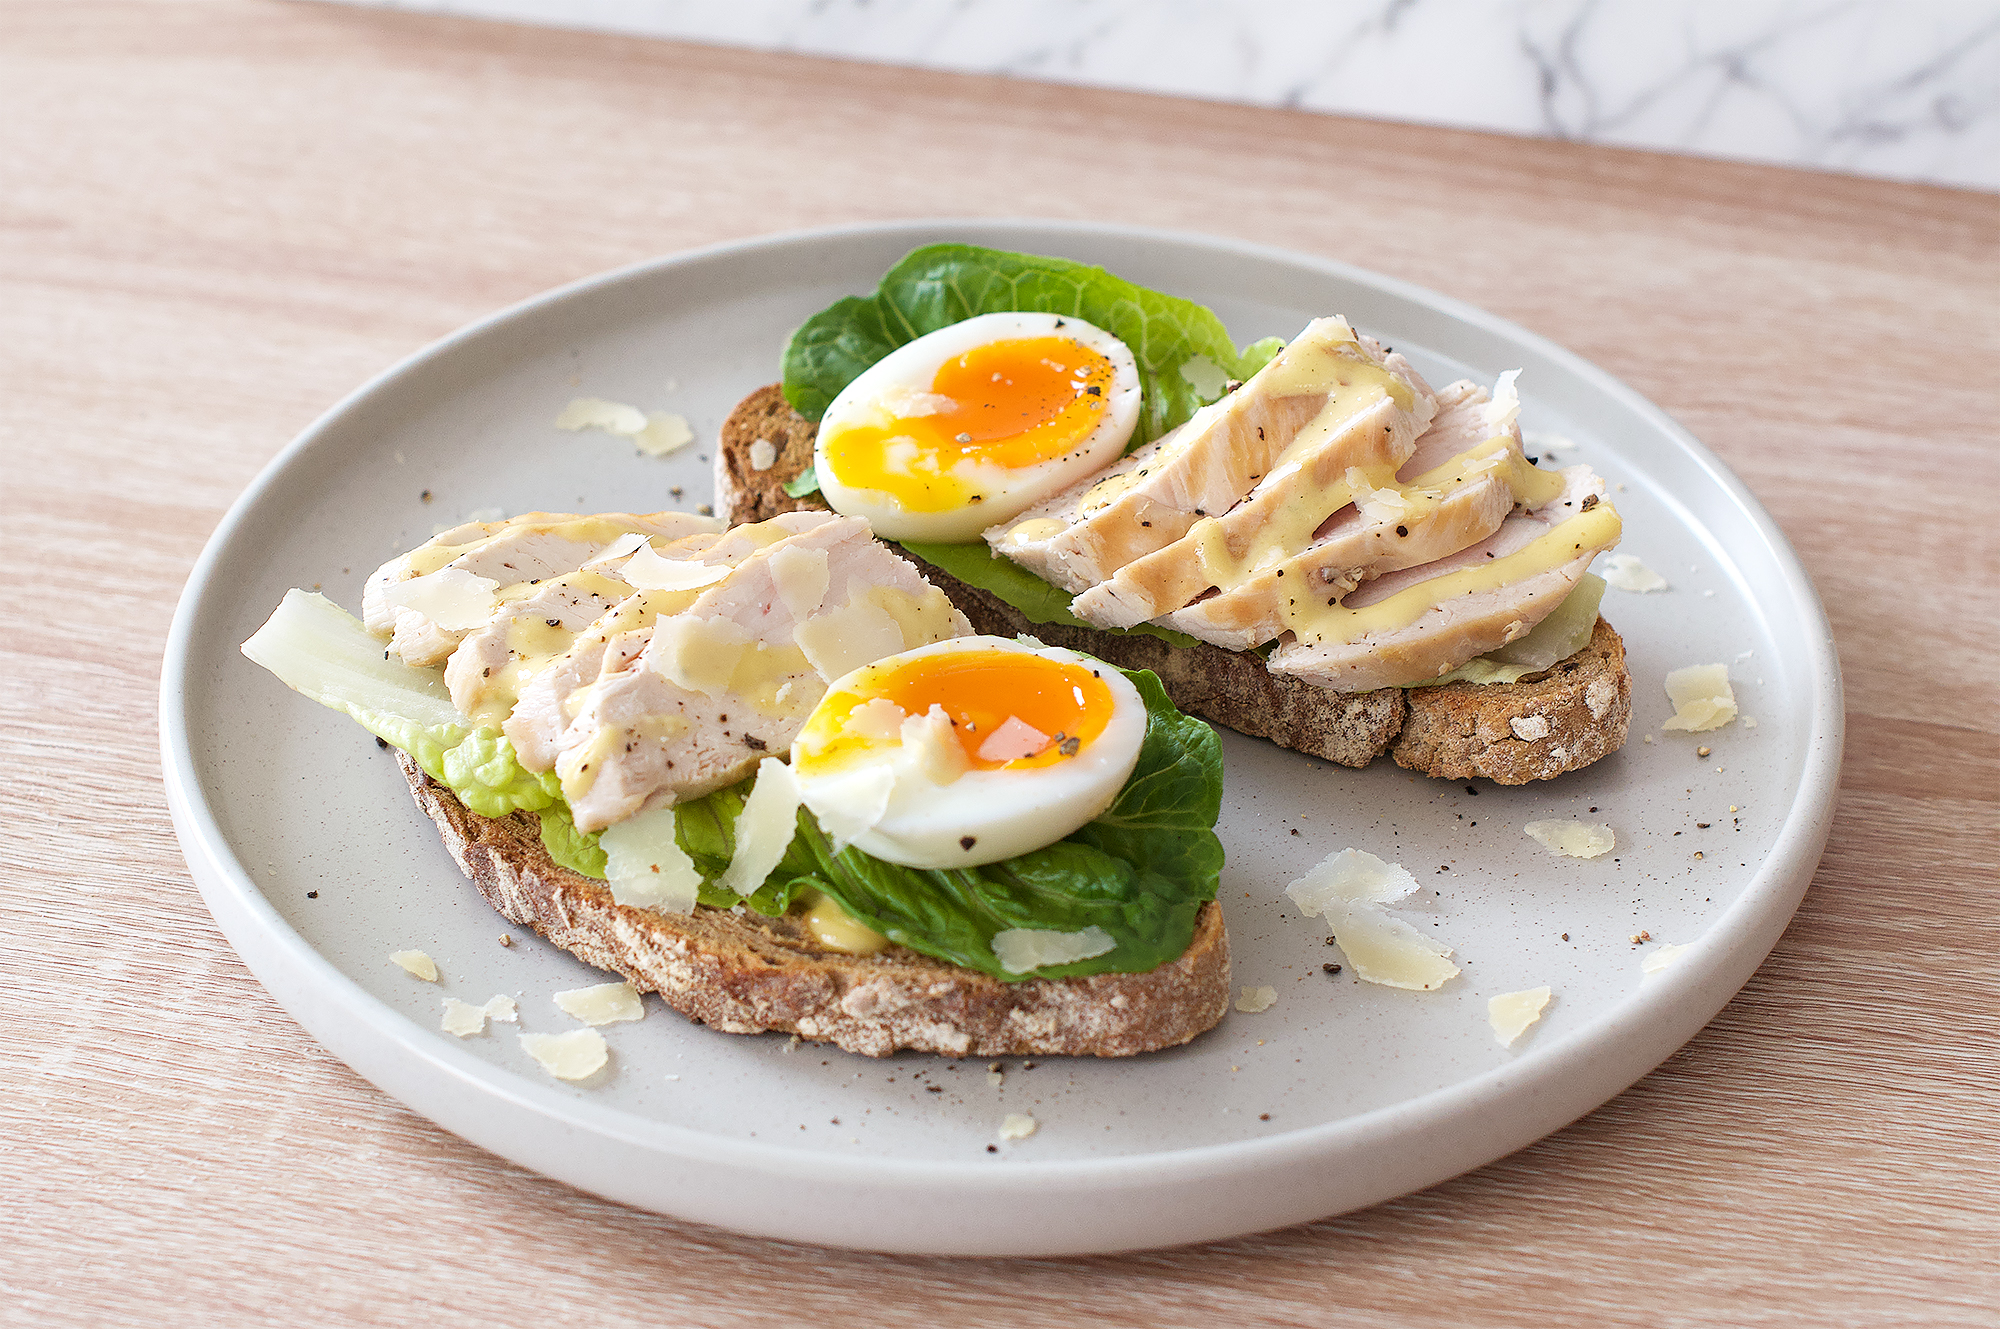 Chicken asar salad and dressing with egg on toast recipe